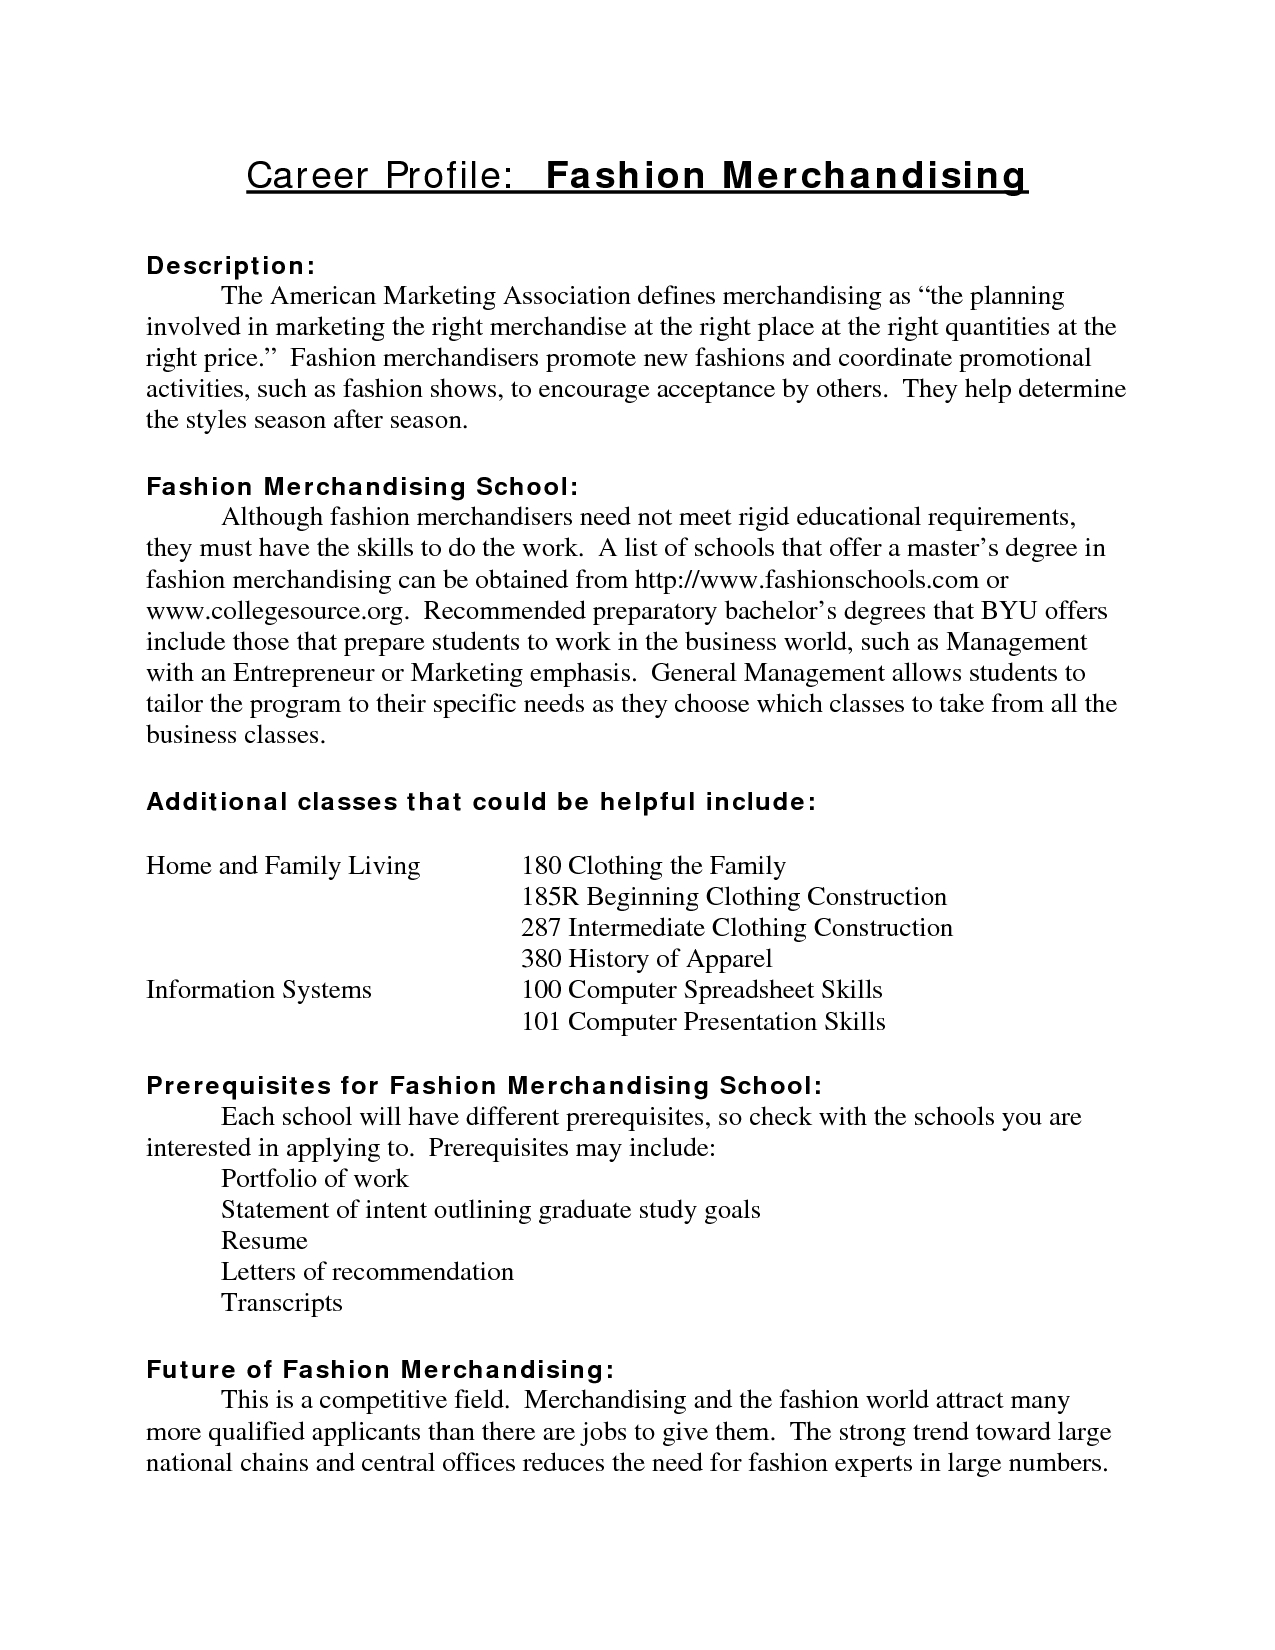 Hair Stylist Resume Fashion Show Resume Examples New Hair Stylist Resume Small Mirrored